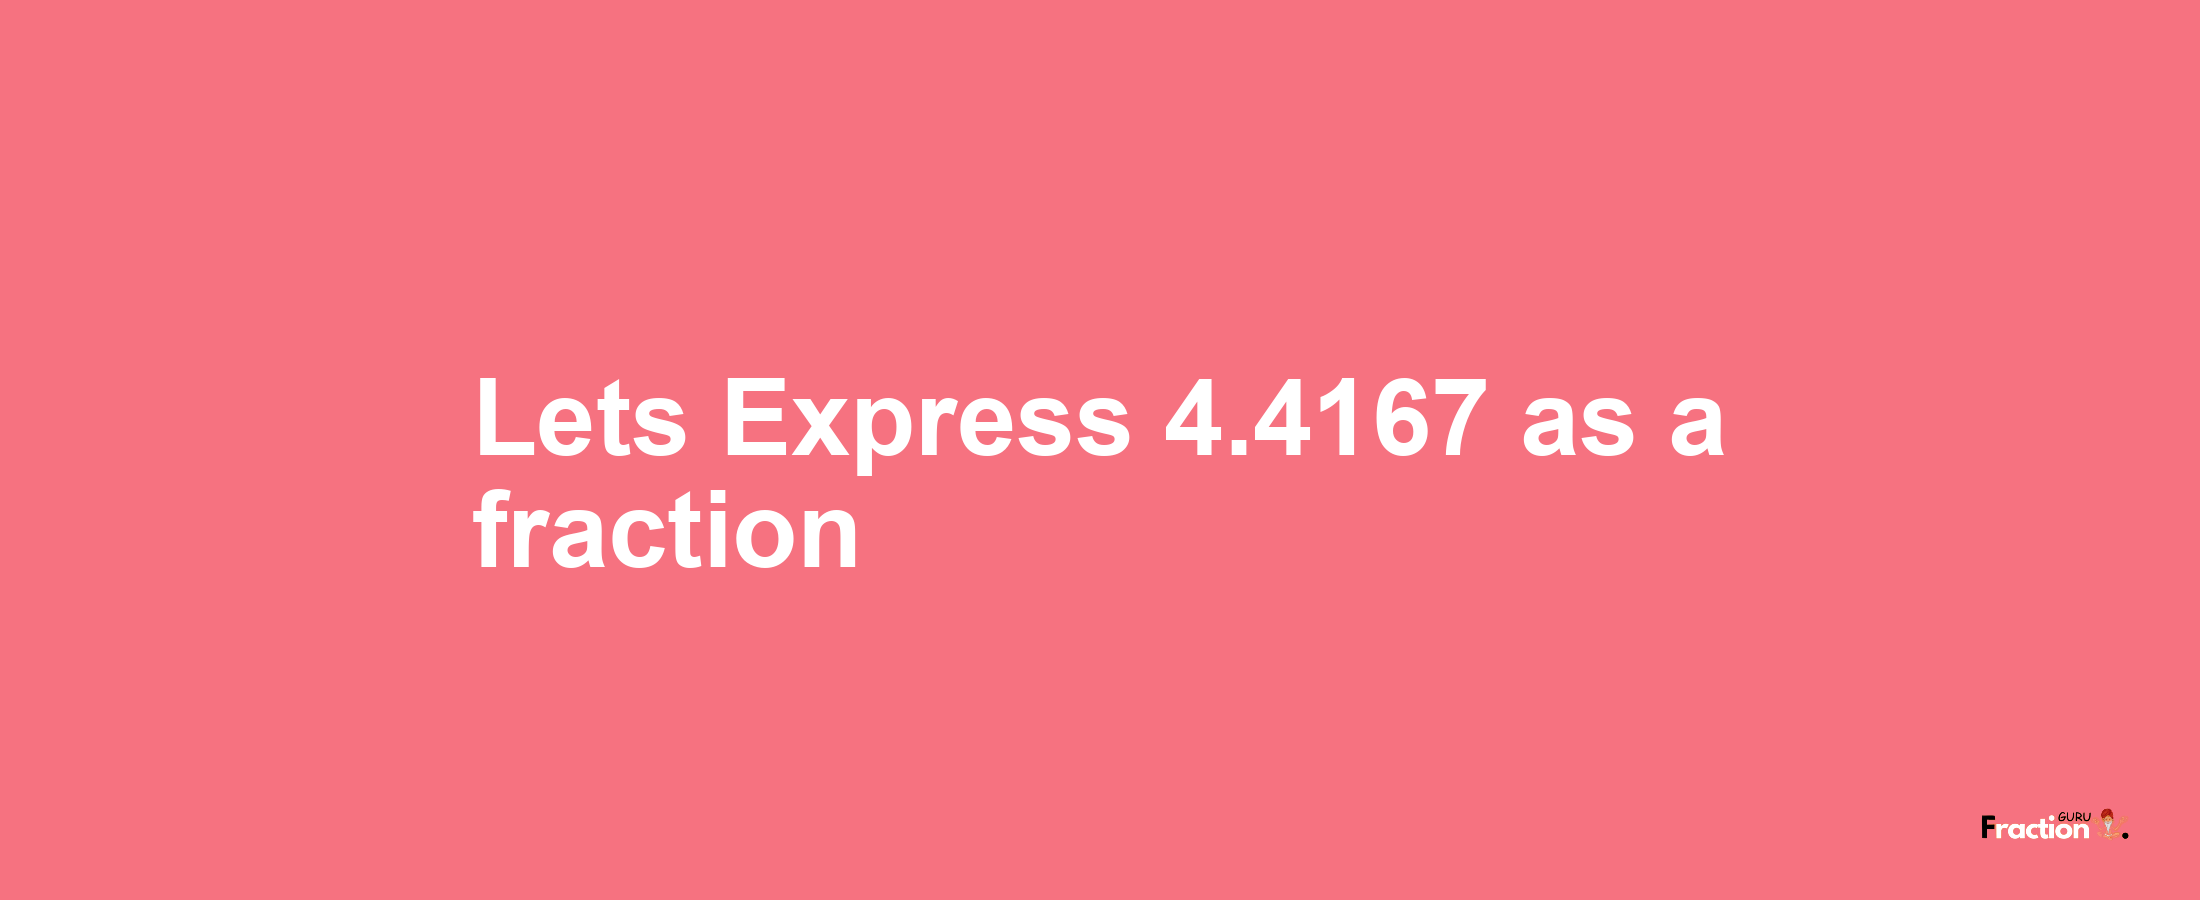 Lets Express 4.4167 as afraction